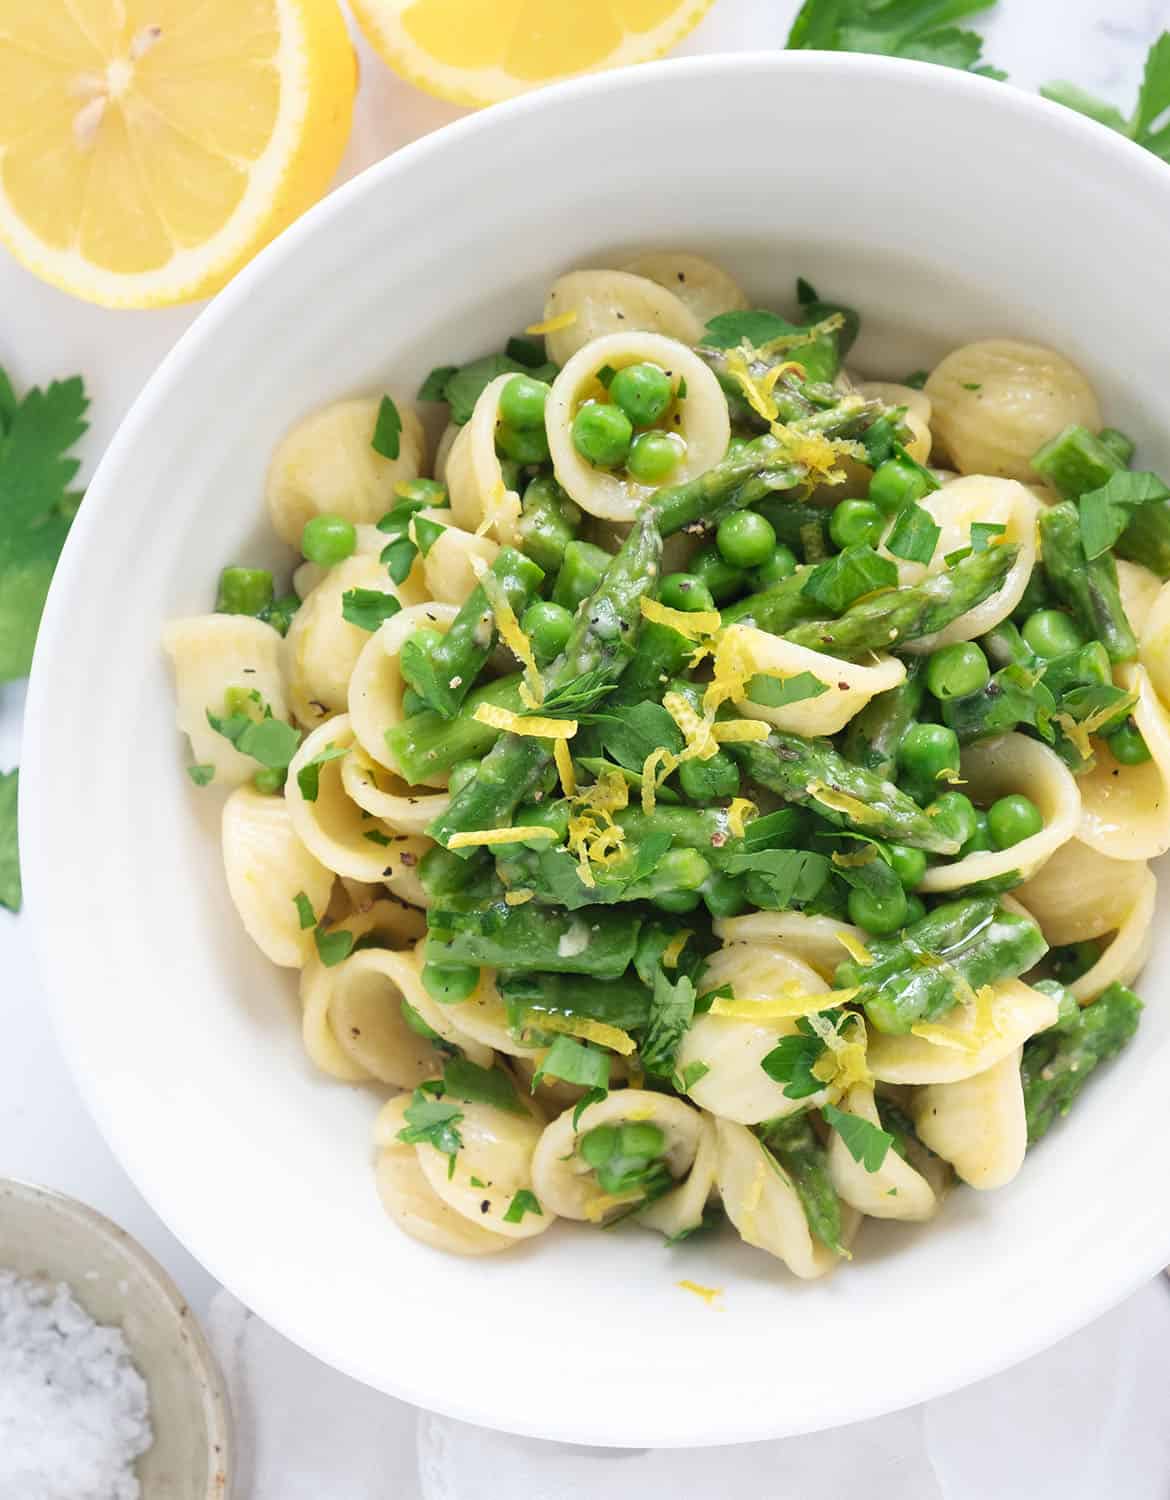 Top view of a white bowl full of pasta with peas and asparagus.